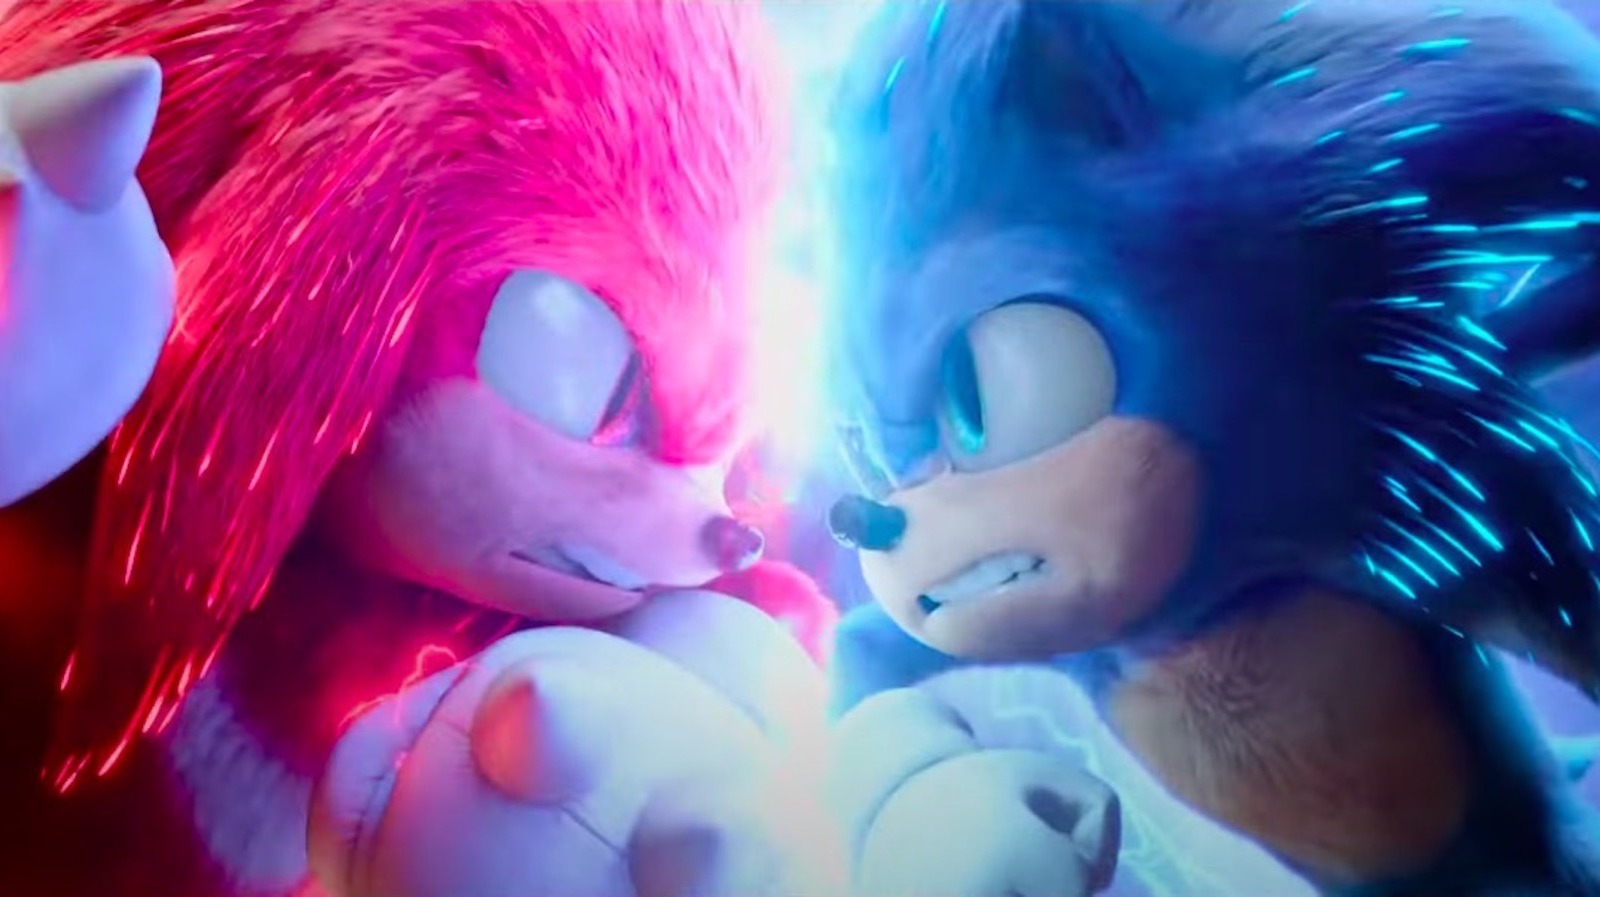 What if Knuckles & Tails had GOOD Super Forms? 